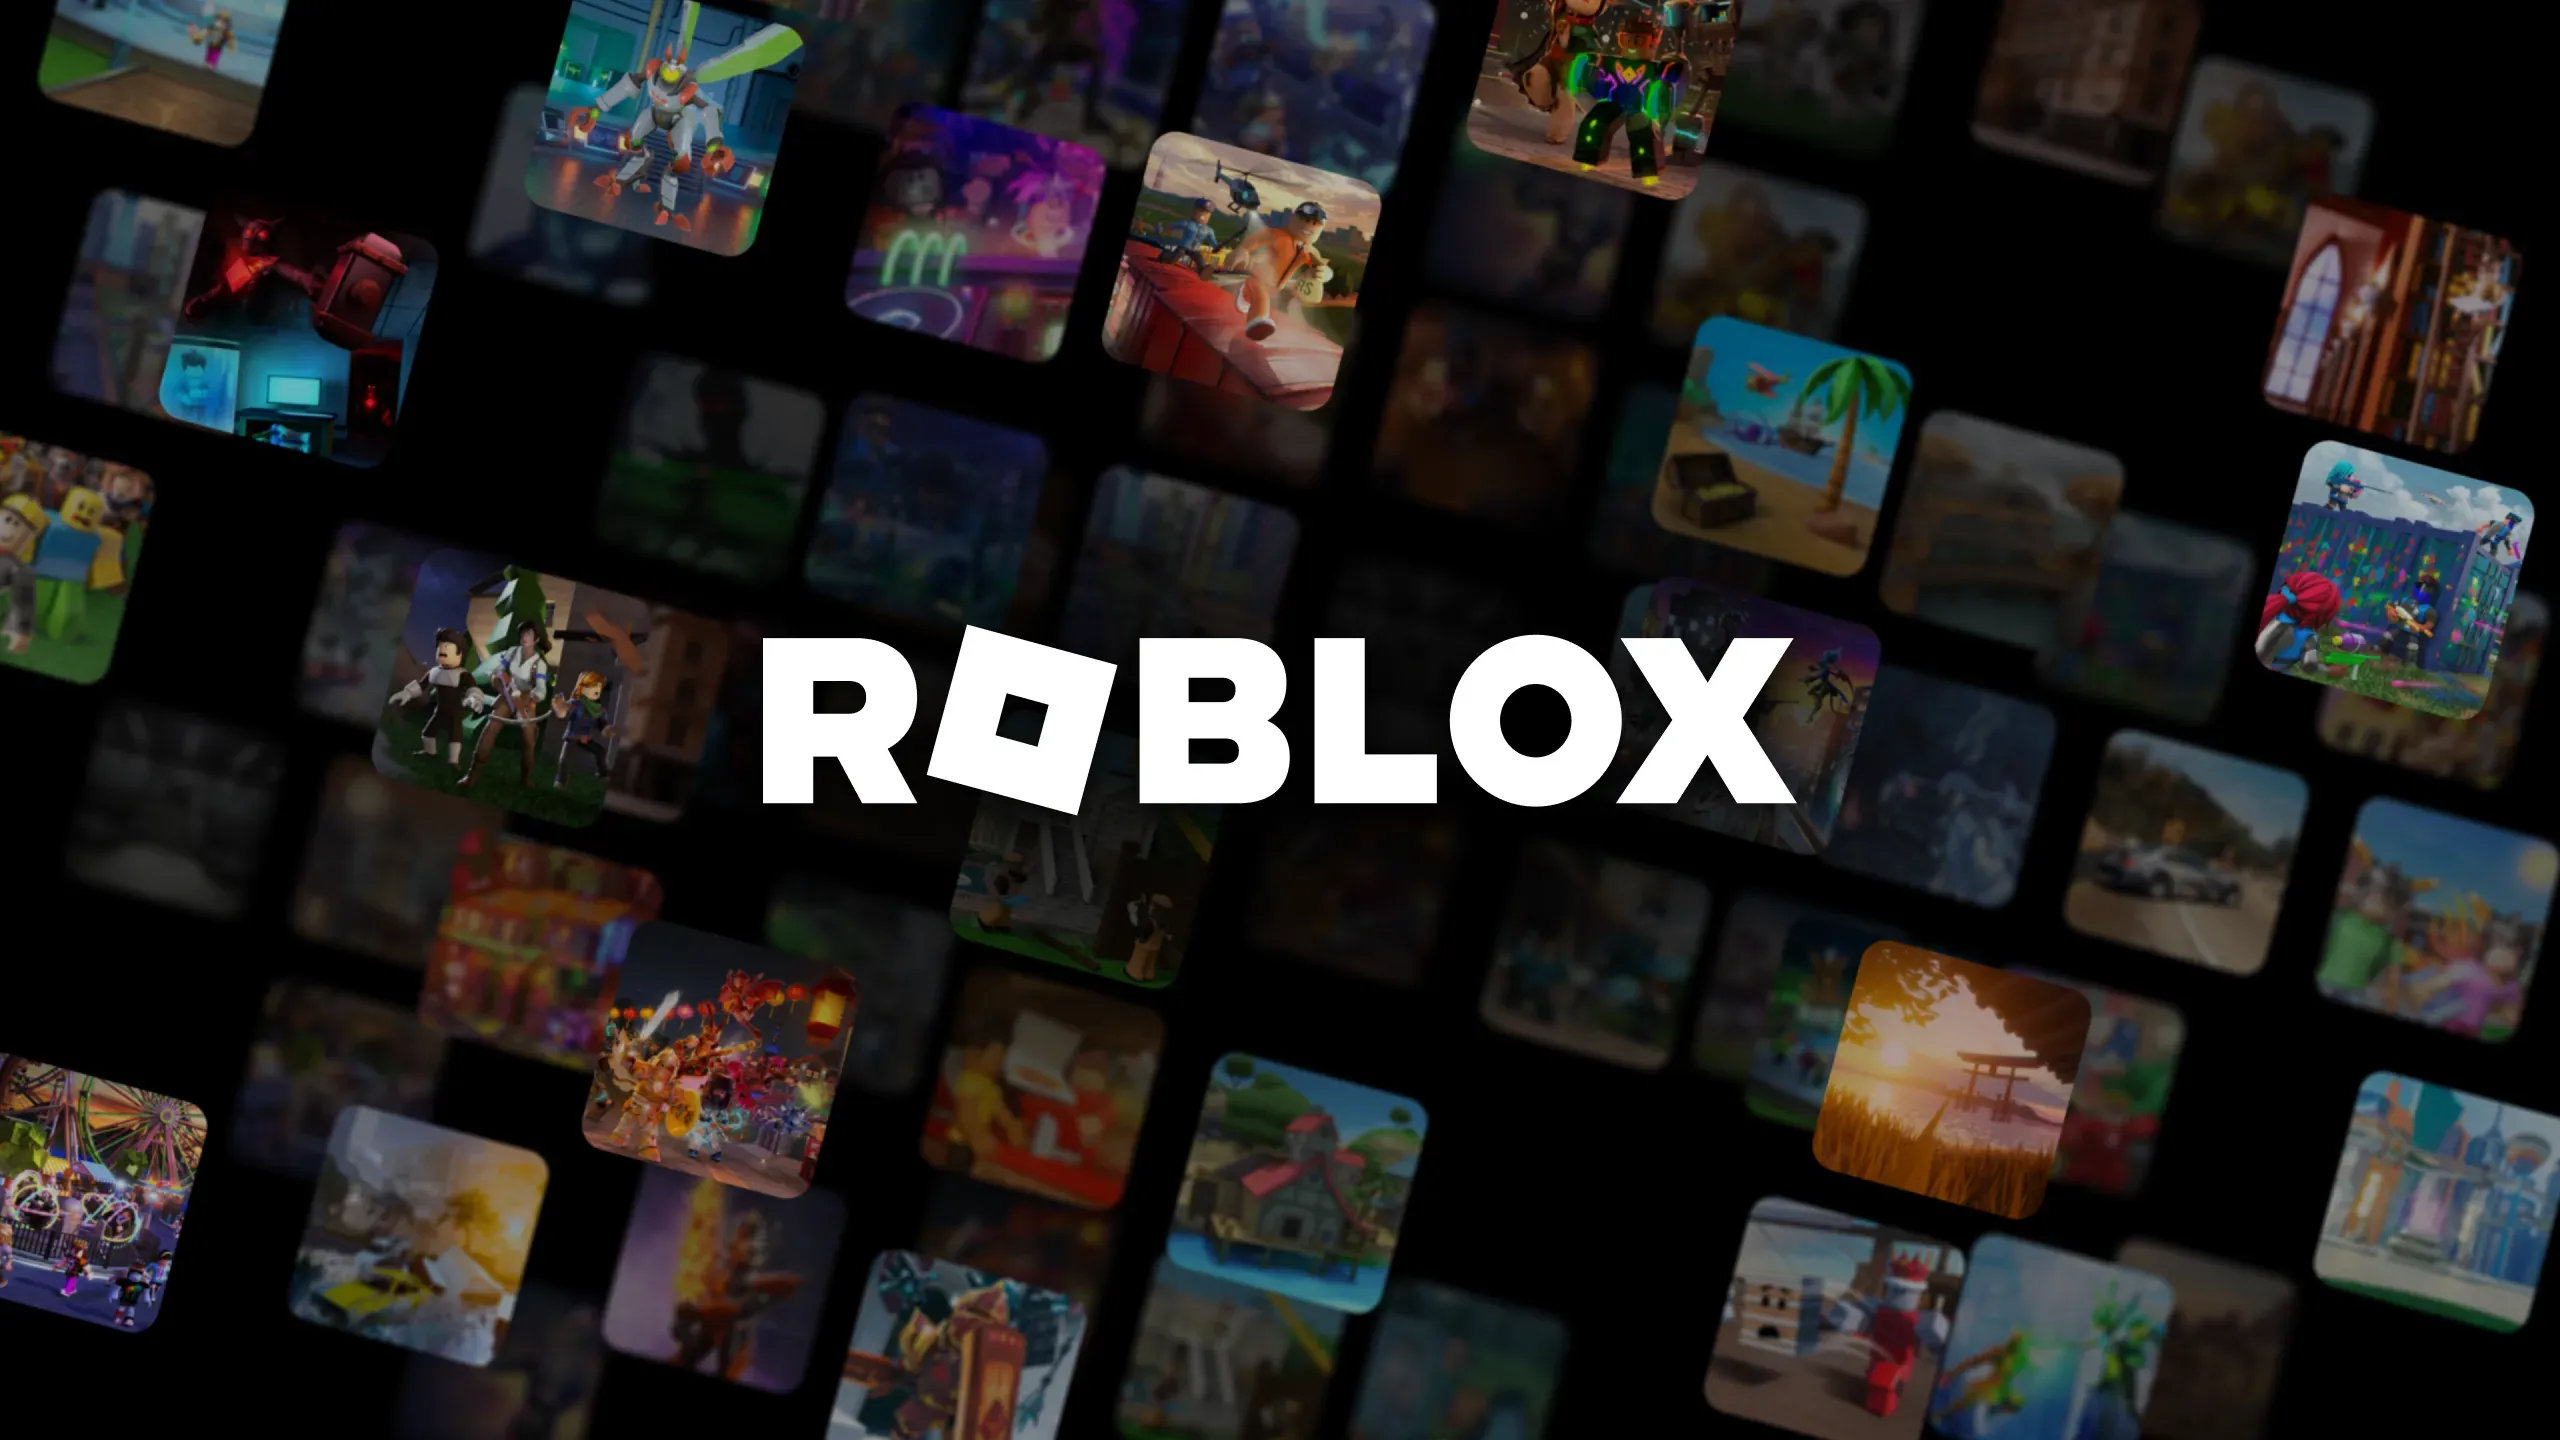 Is Roblox Shutting Down in 2024? Explained